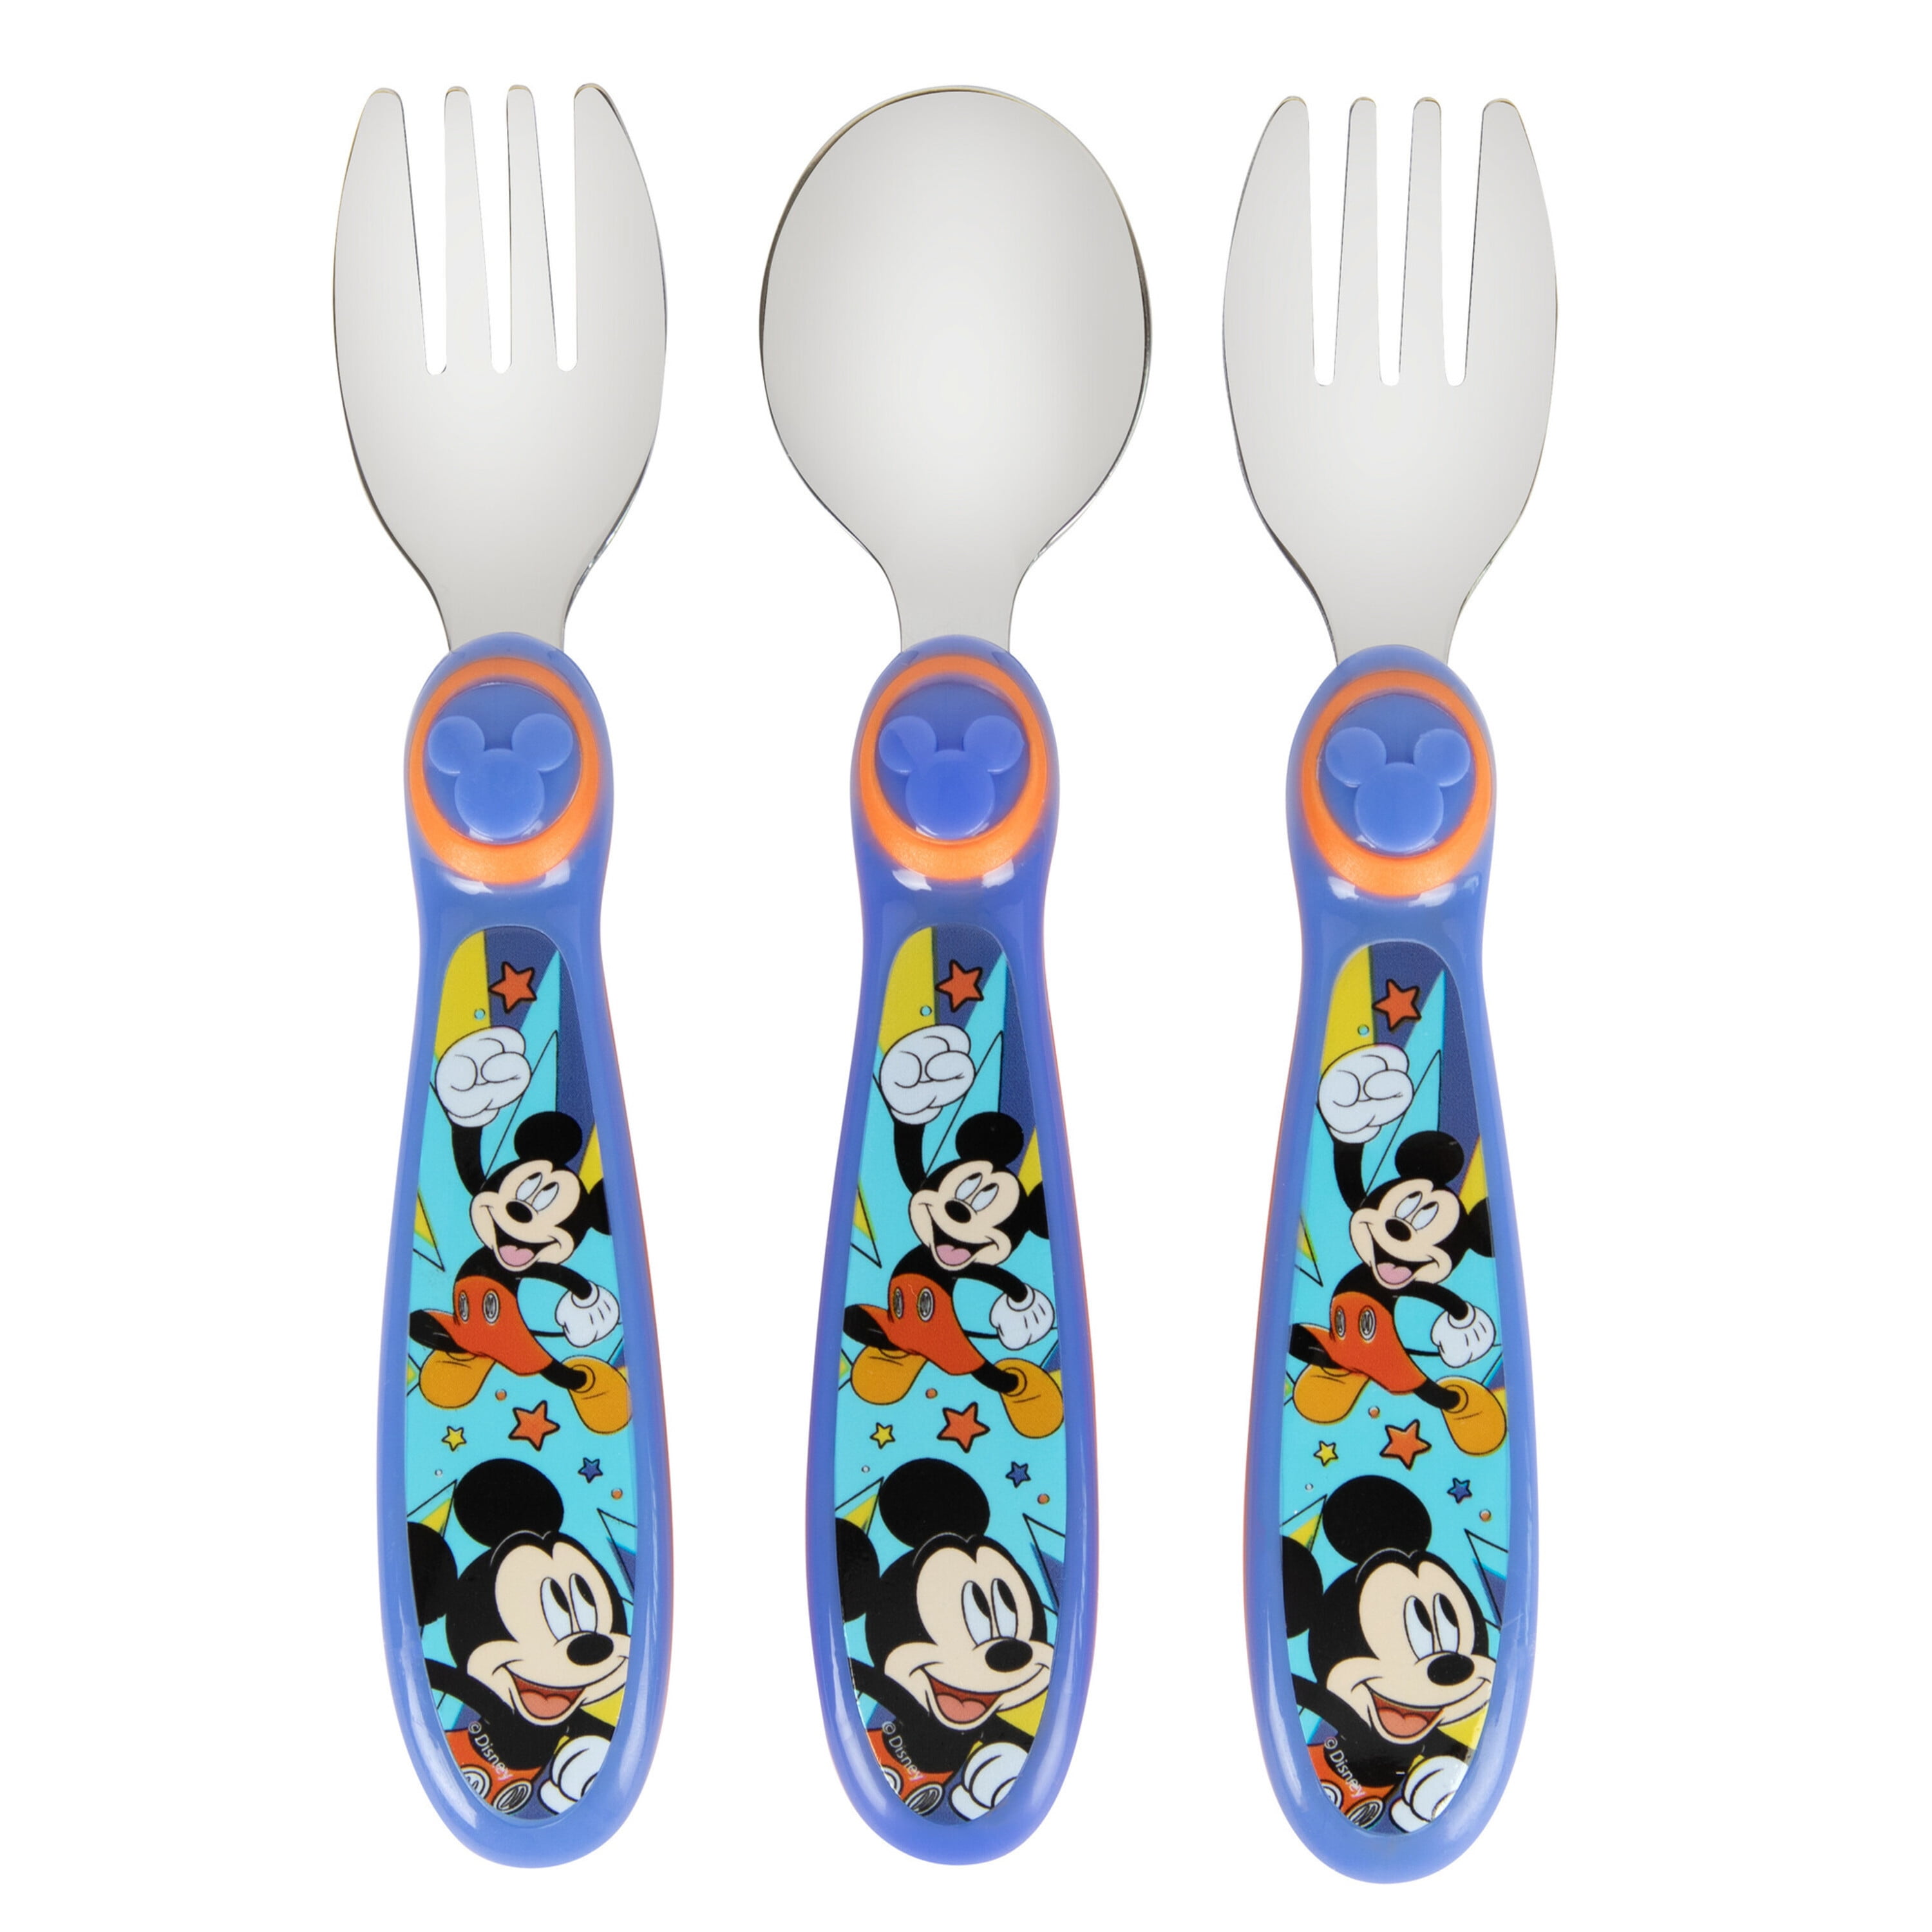 show original title Details about   Disney Store Mickey Mouse Cutlery Set of 12 Summer Fun New in Box 